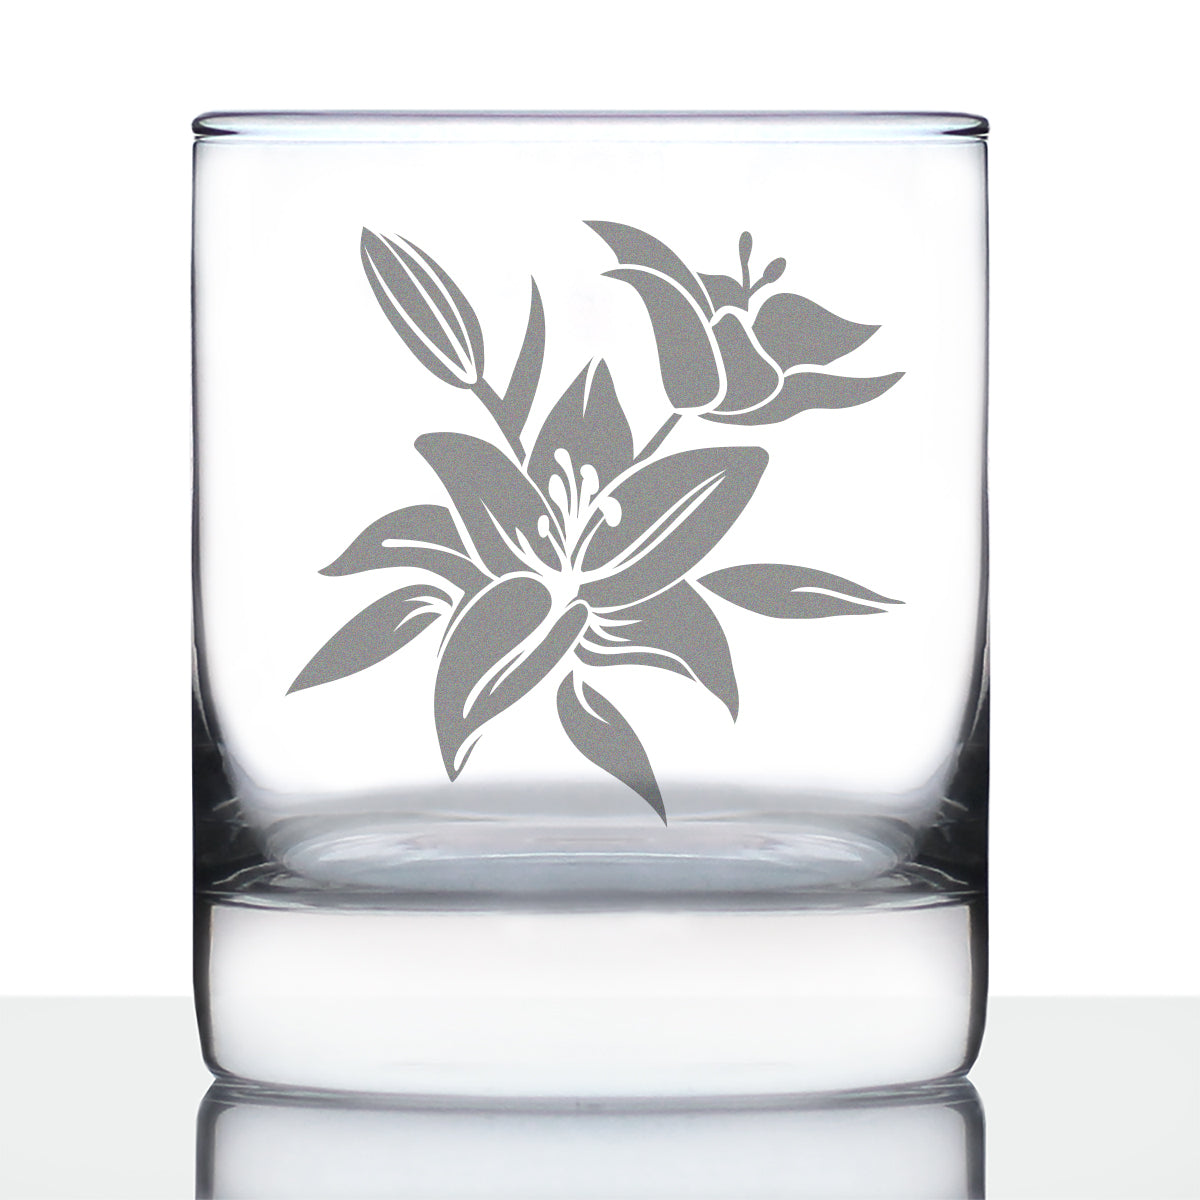 Lily Whiskey Rocks Glass - Floral Themed Decor and Gifts for Flower Lovers - 10.25 Oz Glasses